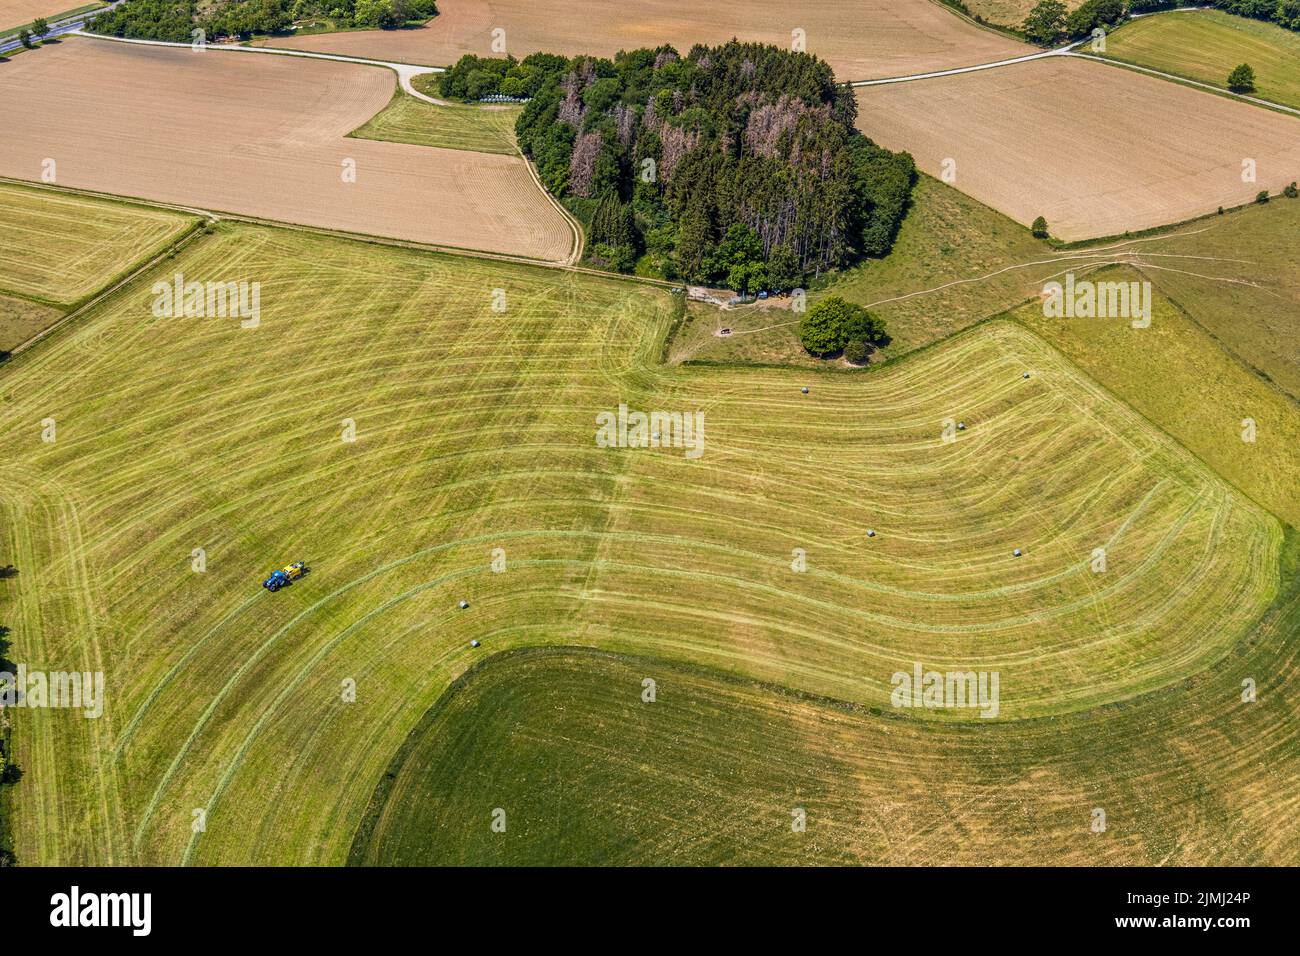 Aerial view, agricultural fields, tractor mowing meadow, Langenholthausen, Balve, Sauerland, North Rhine-Westphalia, Germany, DE, Europe, shapes and c Stock Photo